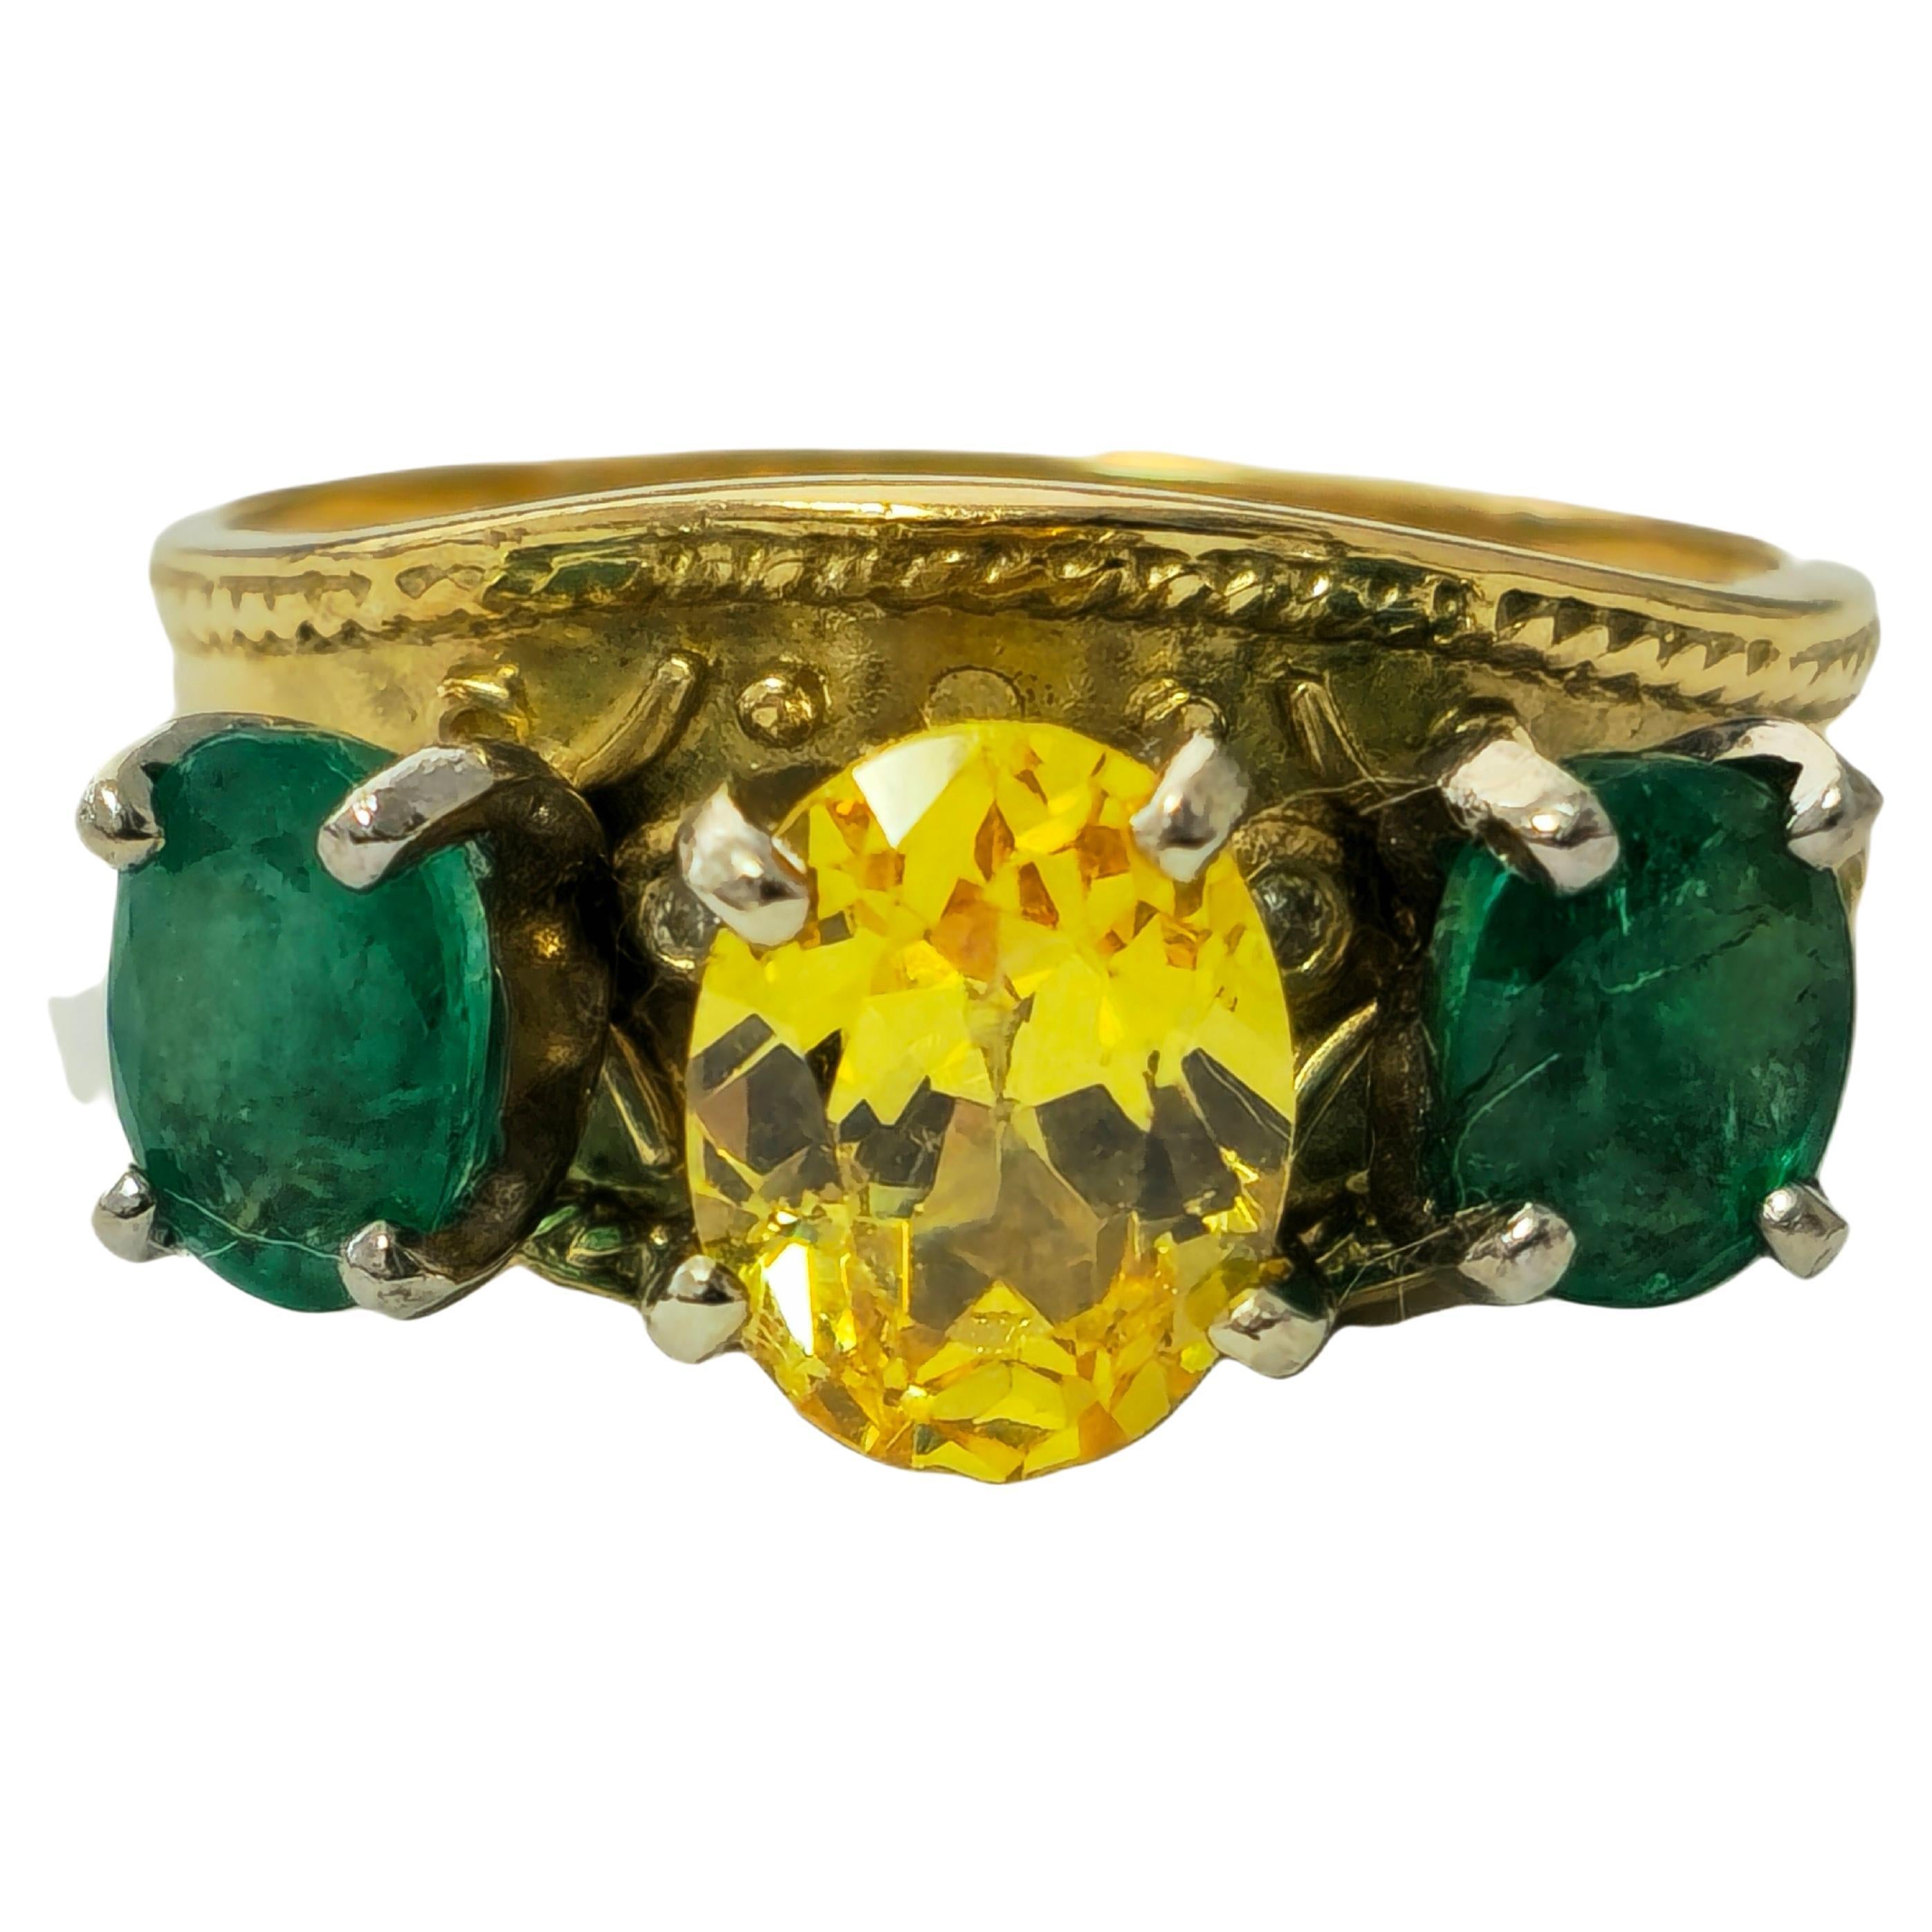 Yellow Sapphire & Emerald Cocktail Ring in 18k yellow Gold